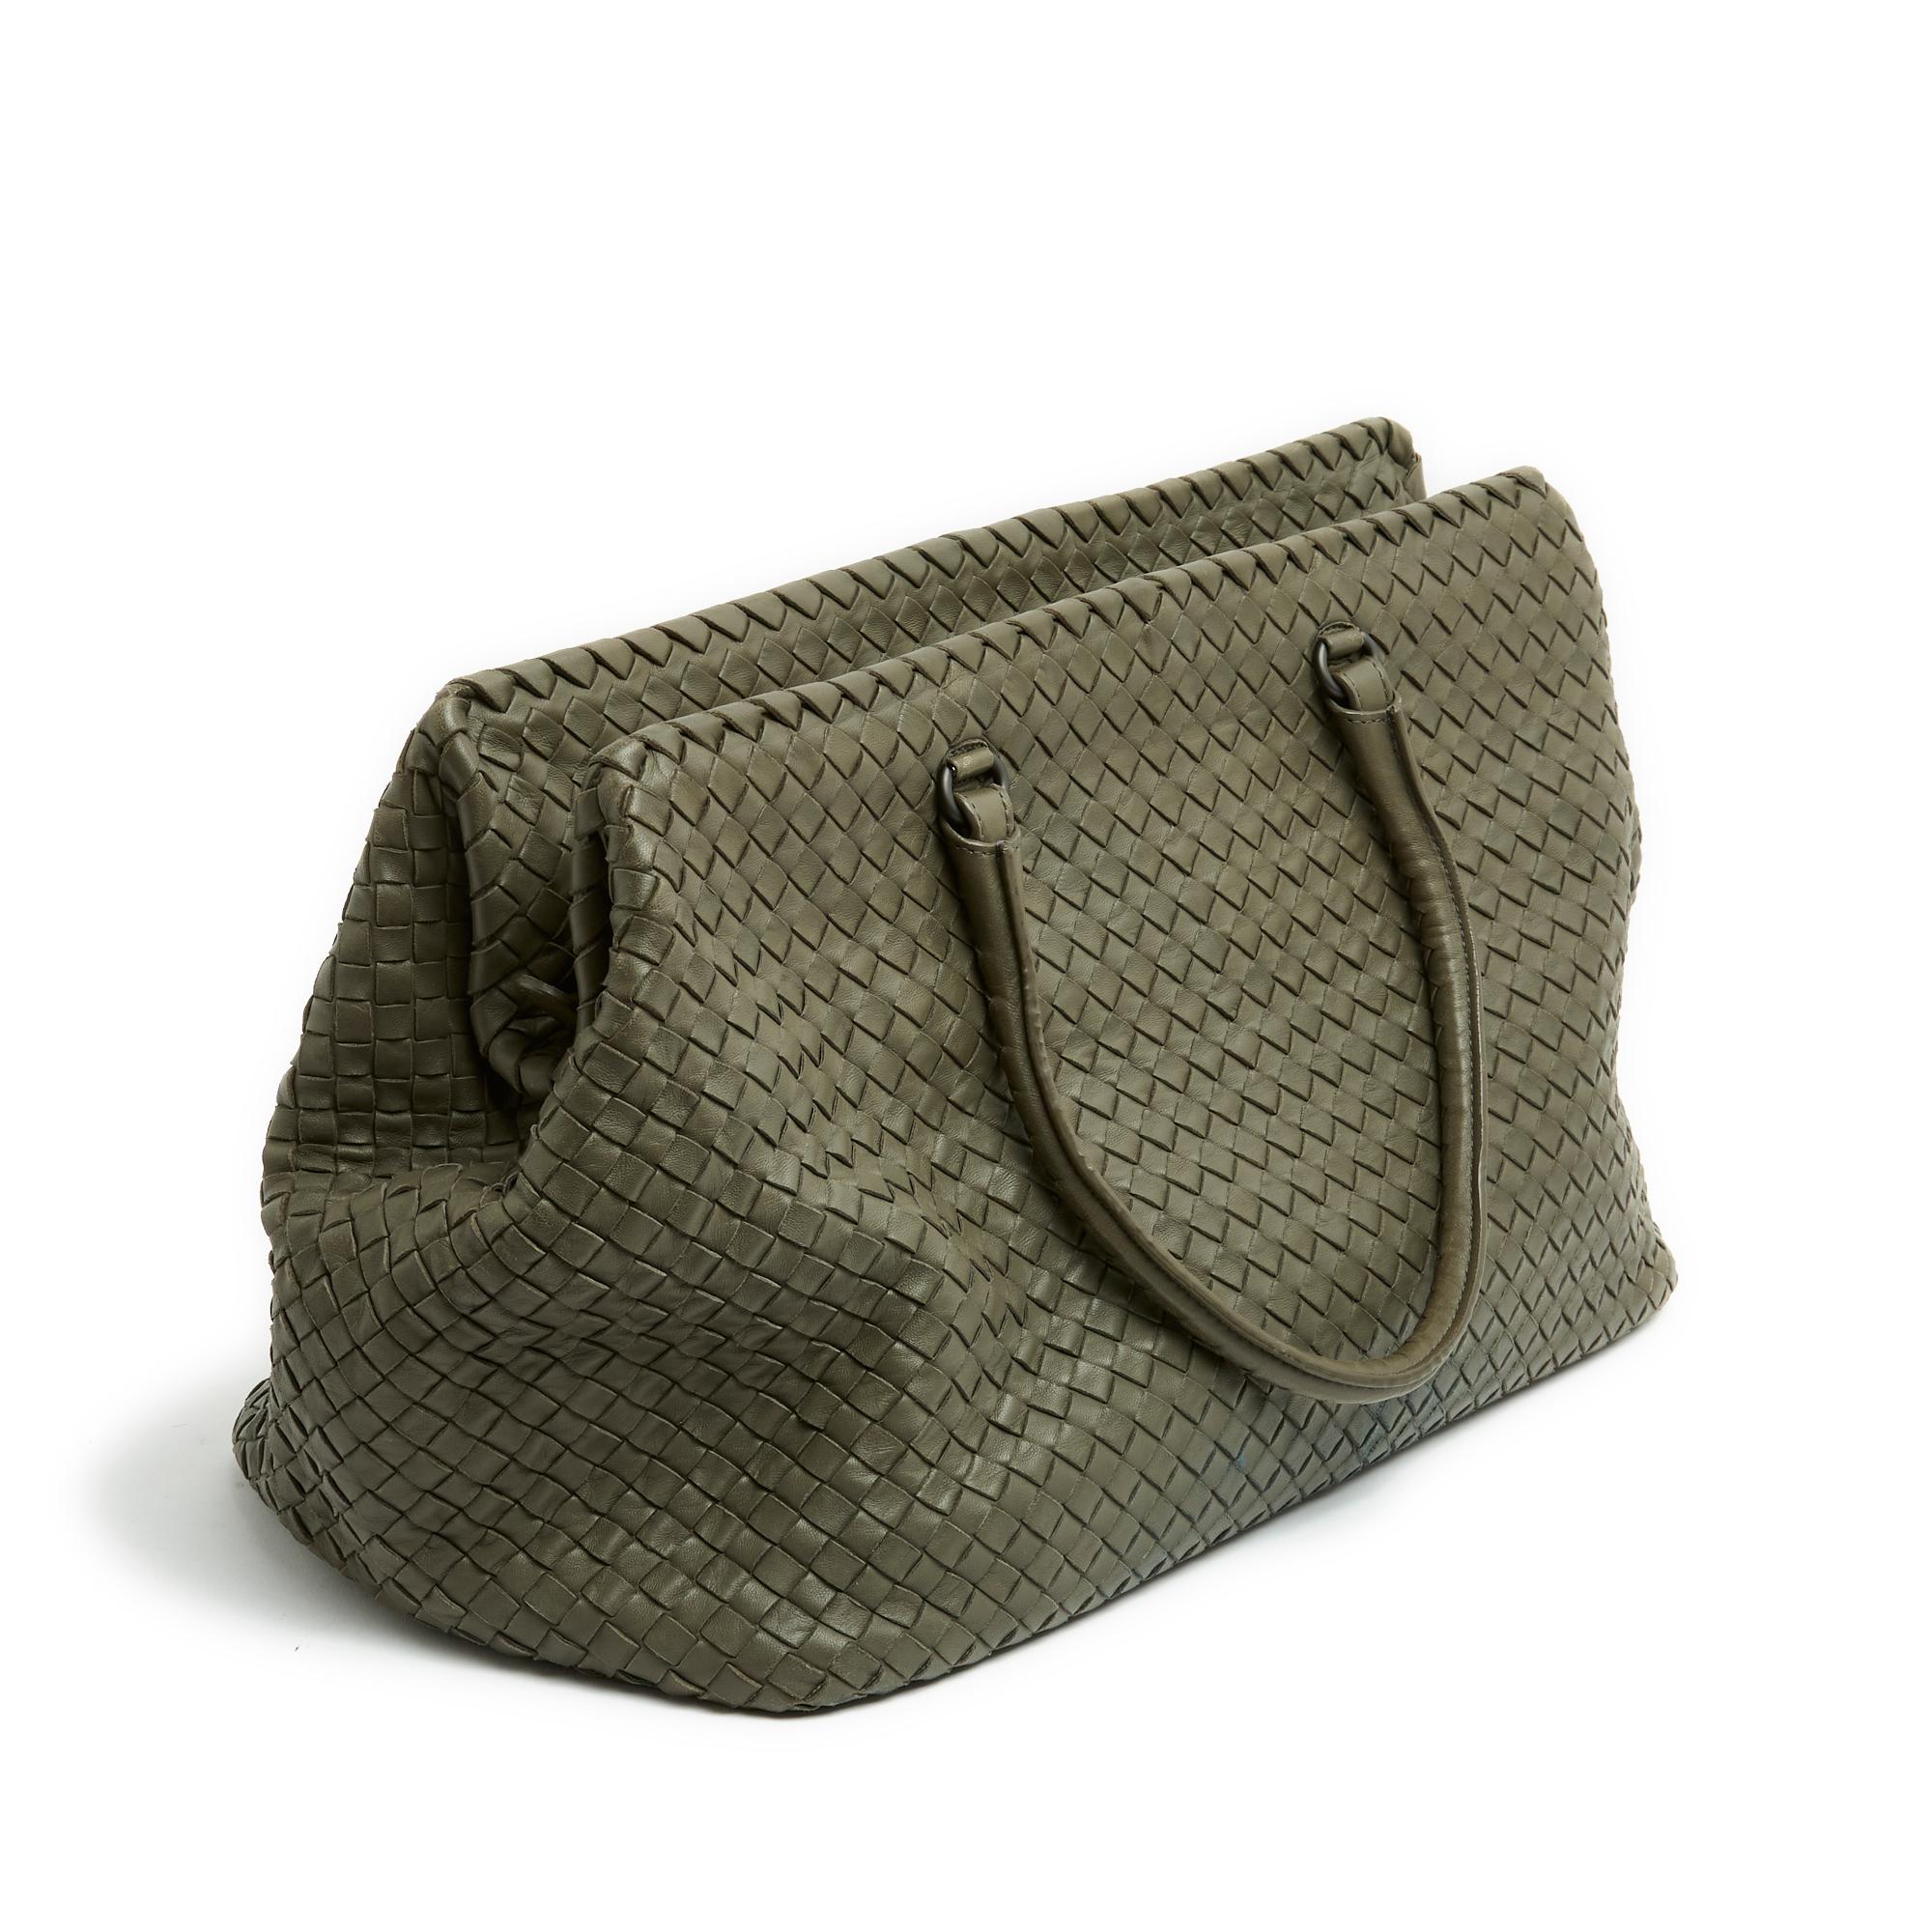 Bottega Veneta medium size travel bag Model or 48h in dark olive green intrecciato leather, coordinated suede interior with a large zipped pocket, 2 handles for carrying in the hand (or shoulders but without coat), closing with a double slider zip